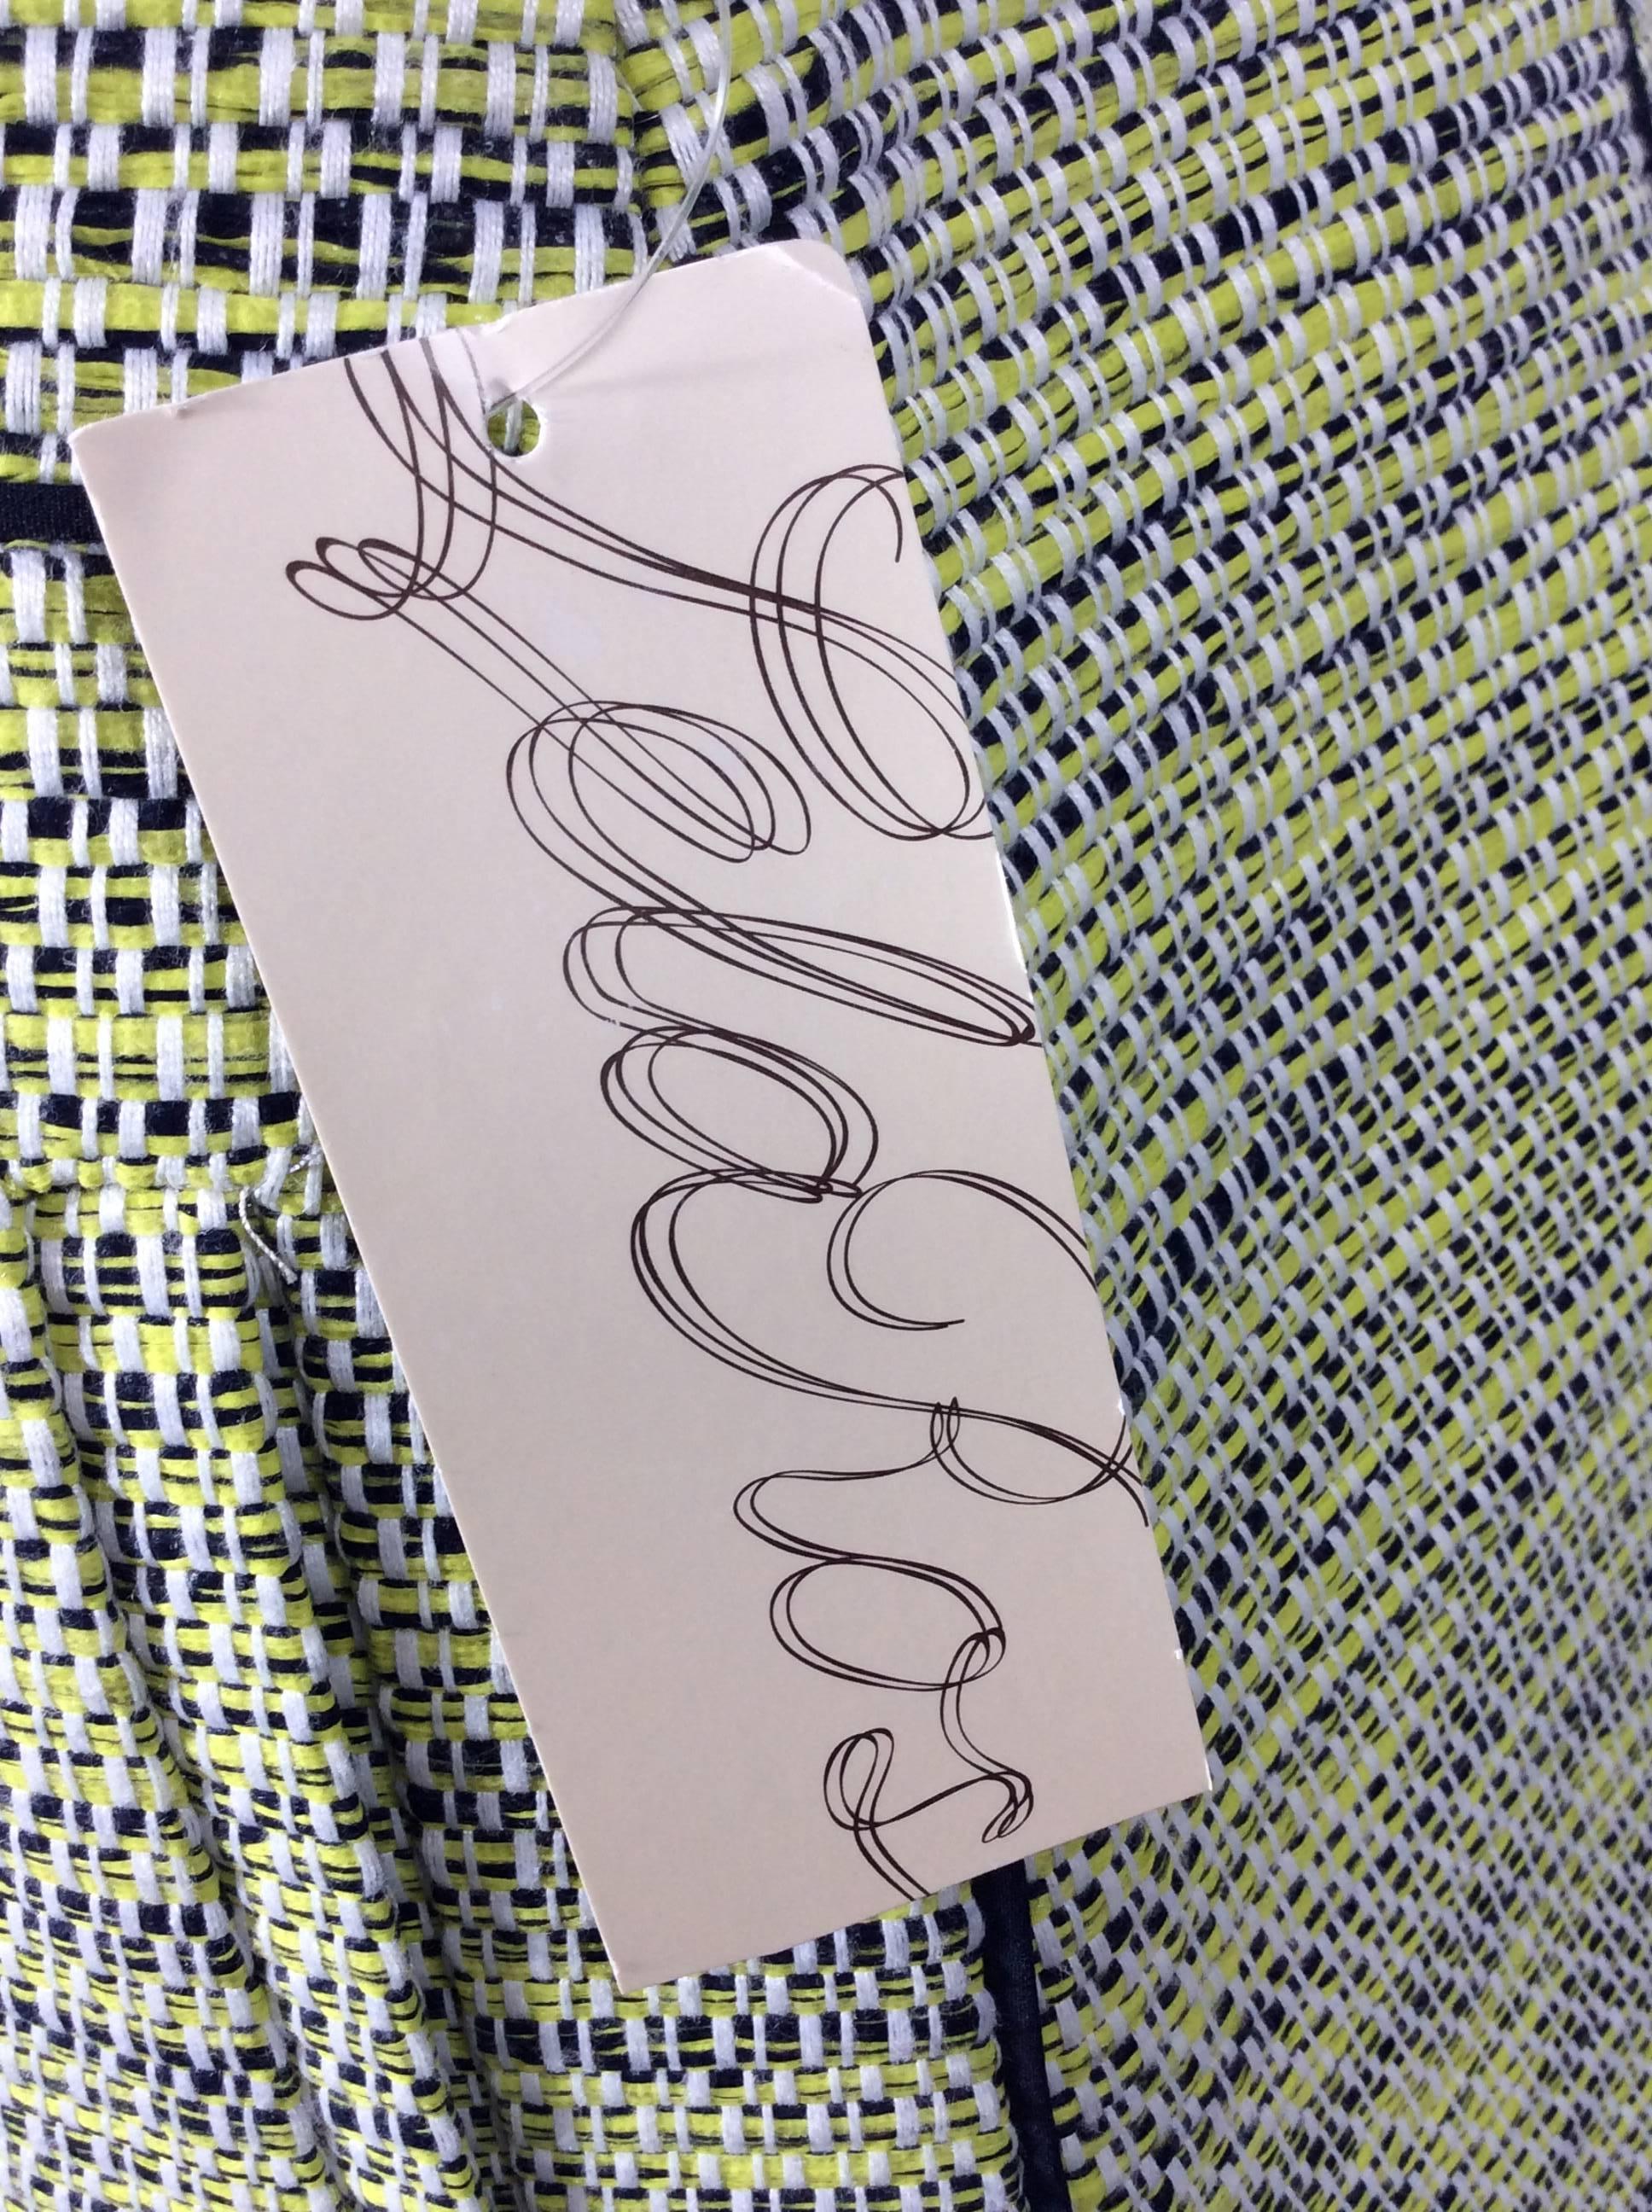 Chartreuse and Black Basket Weave A-line Skirt
Includes one pocket on either hip with black piping detail
Two back darts with decorative piping
Center back zipper with hook and eye closure
Size 0